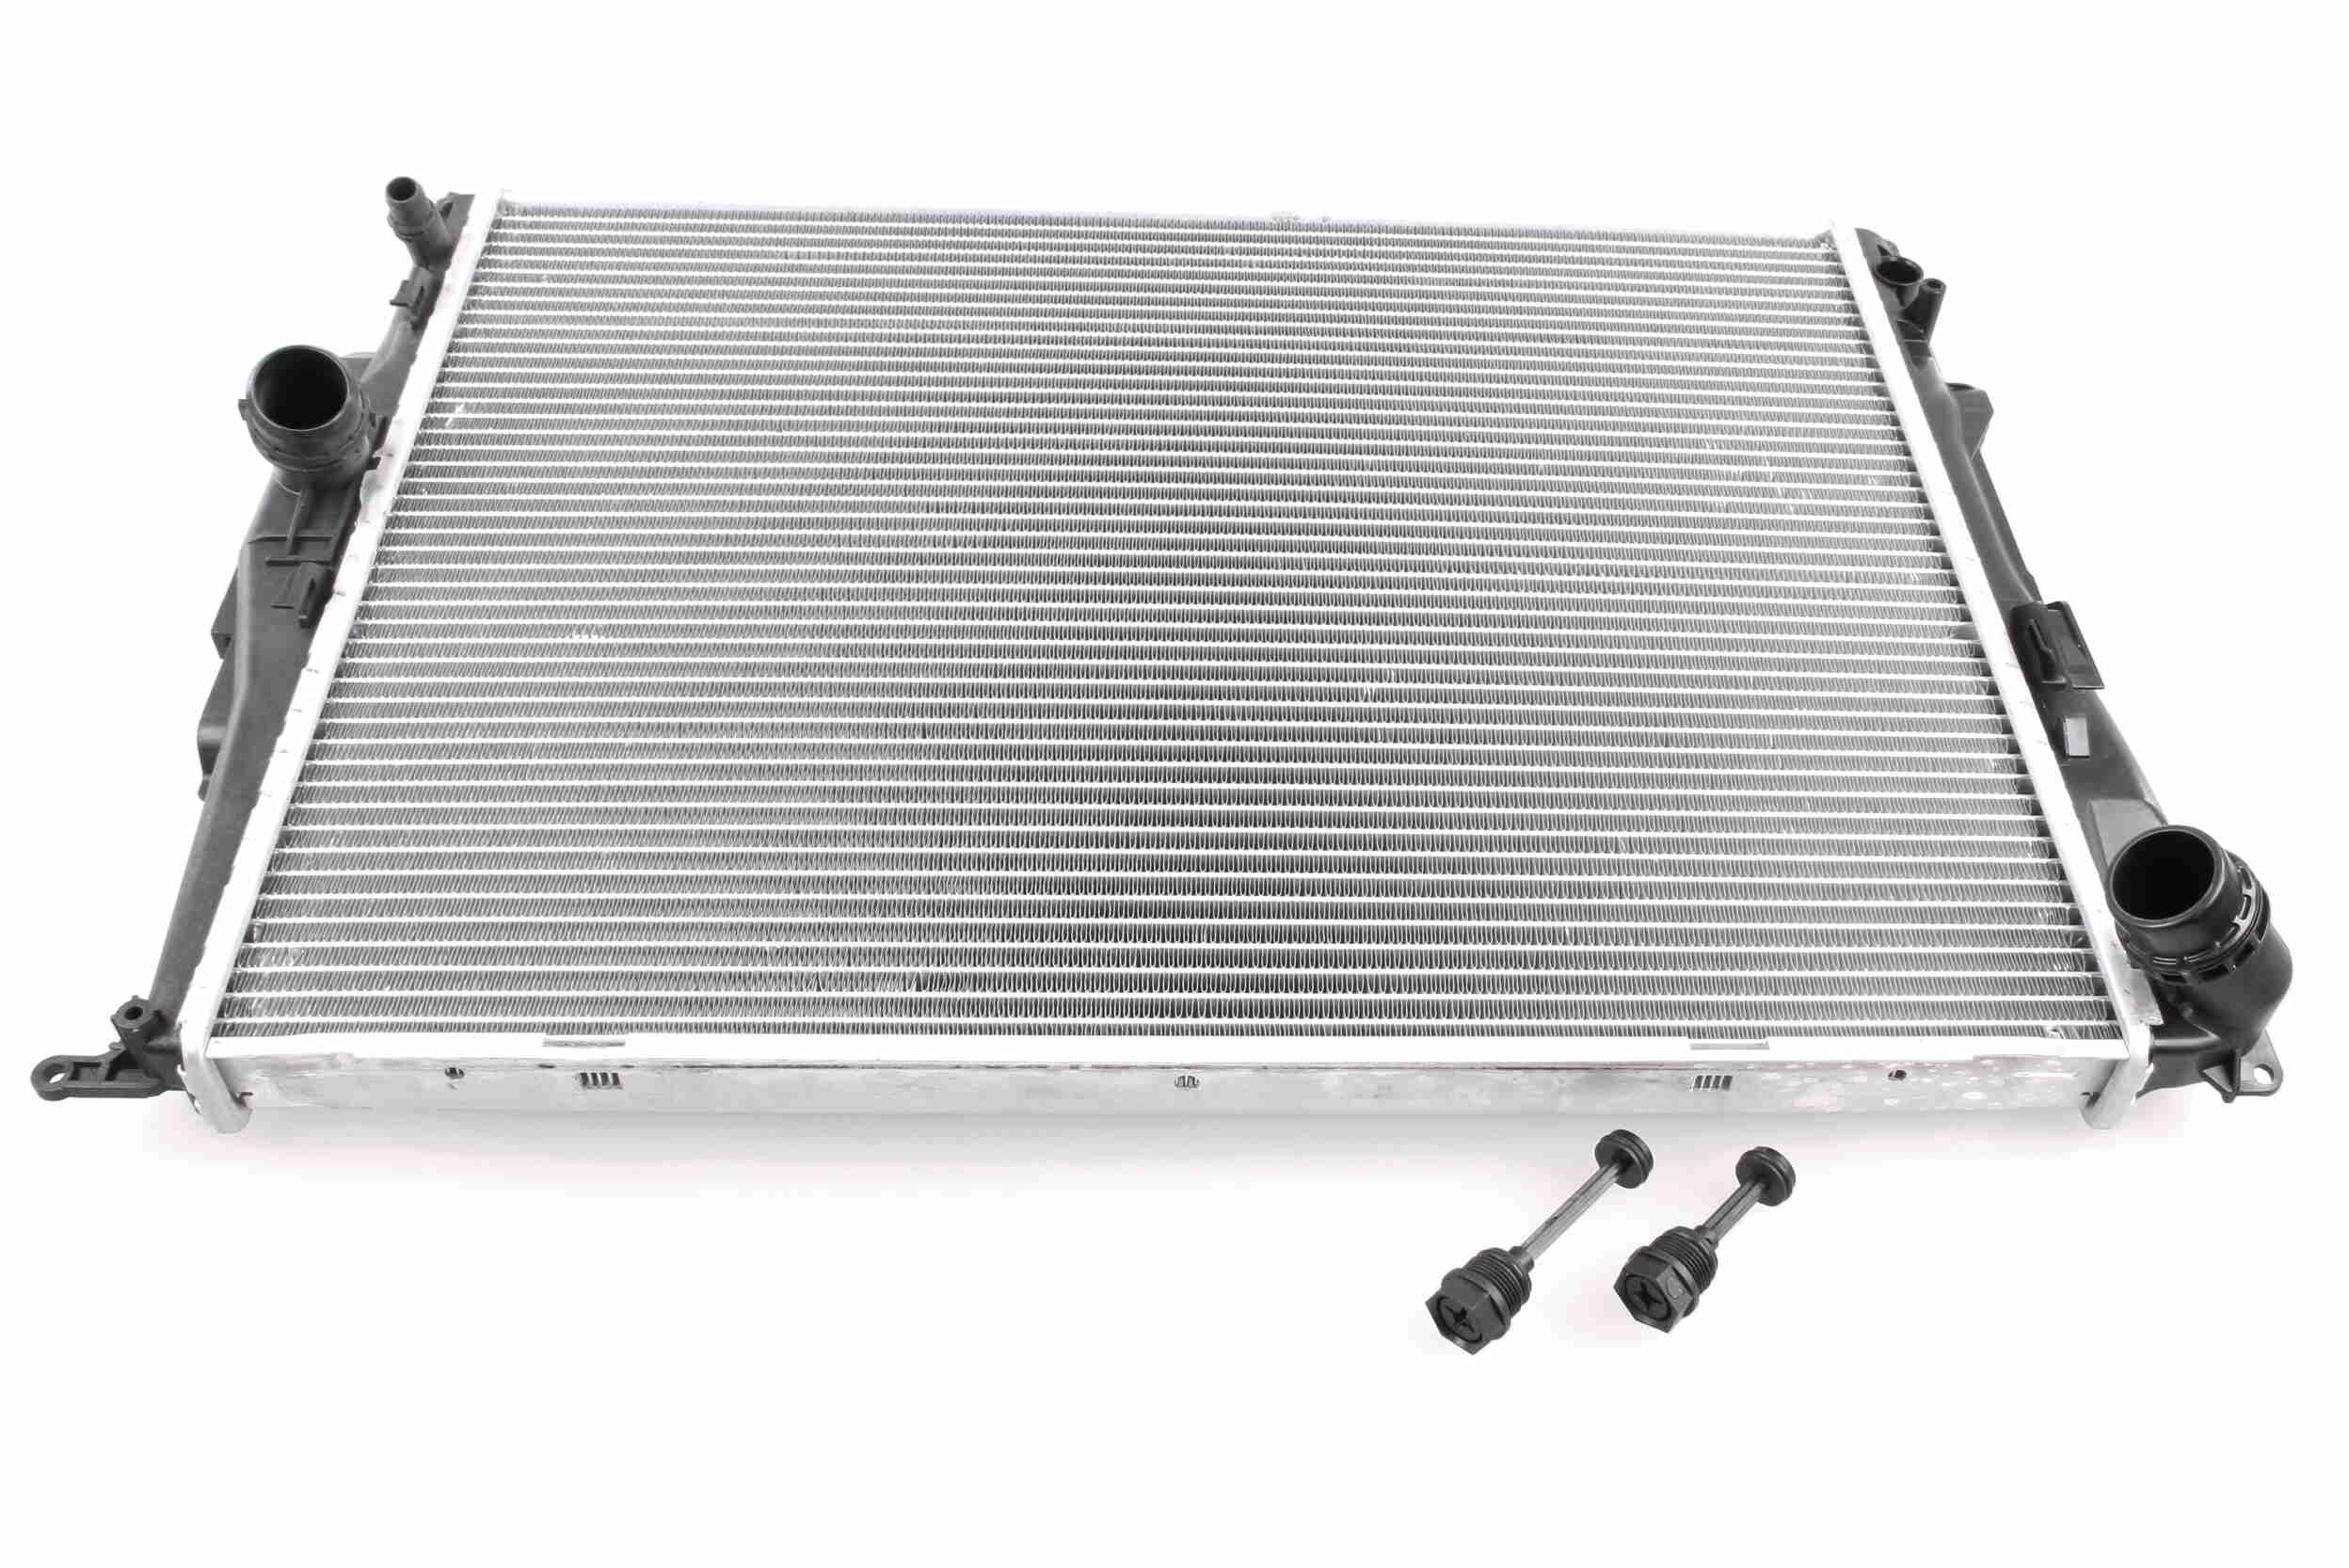 VEMO V20-60-0007 Engine radiator for vehicles with/without air conditioning, 600 x 458 x 30 mm, Original VEMO Quality